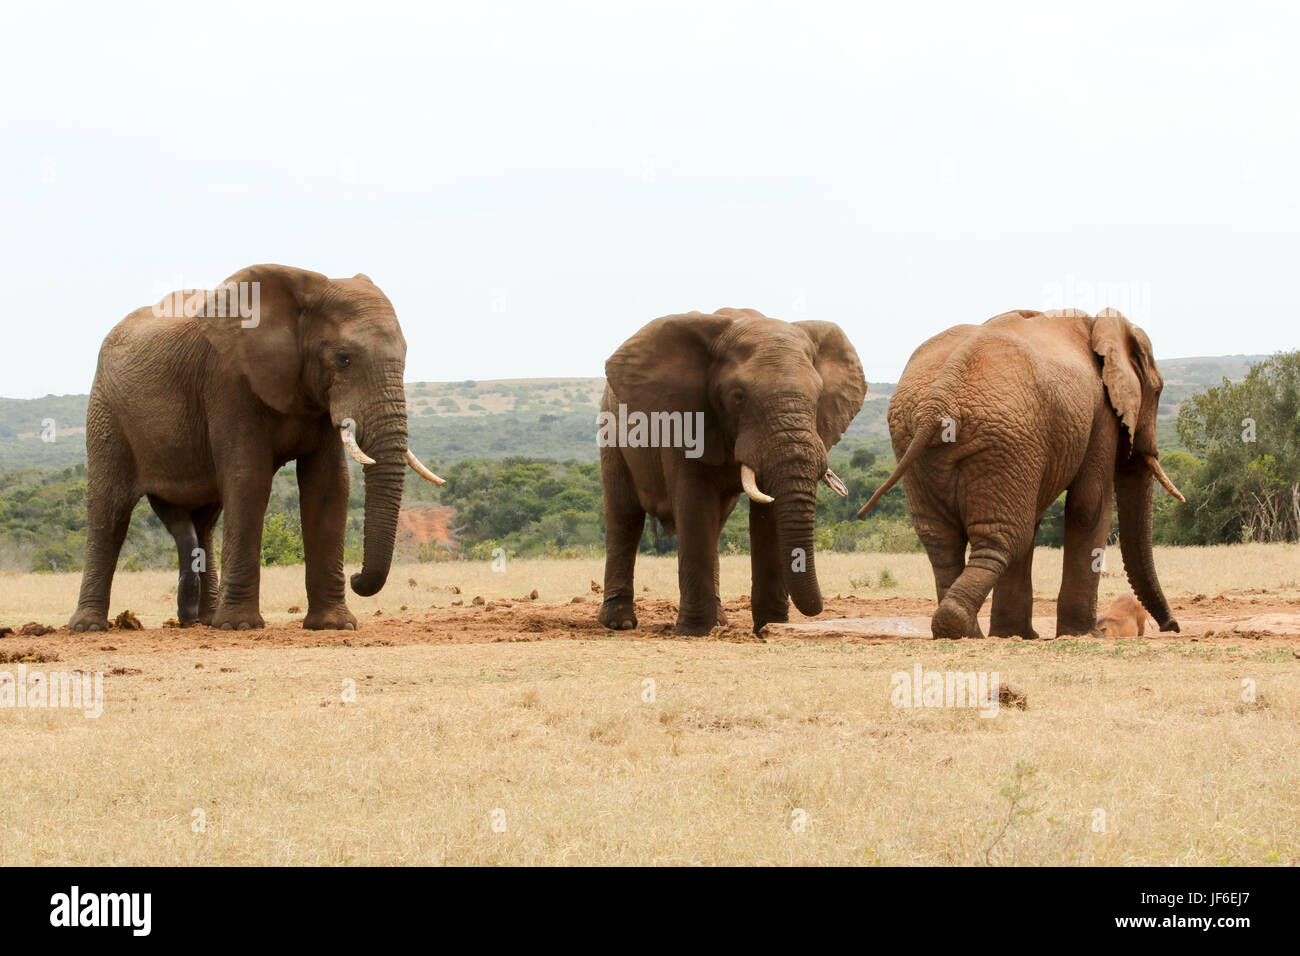 Who is the boss in an elephant herd?